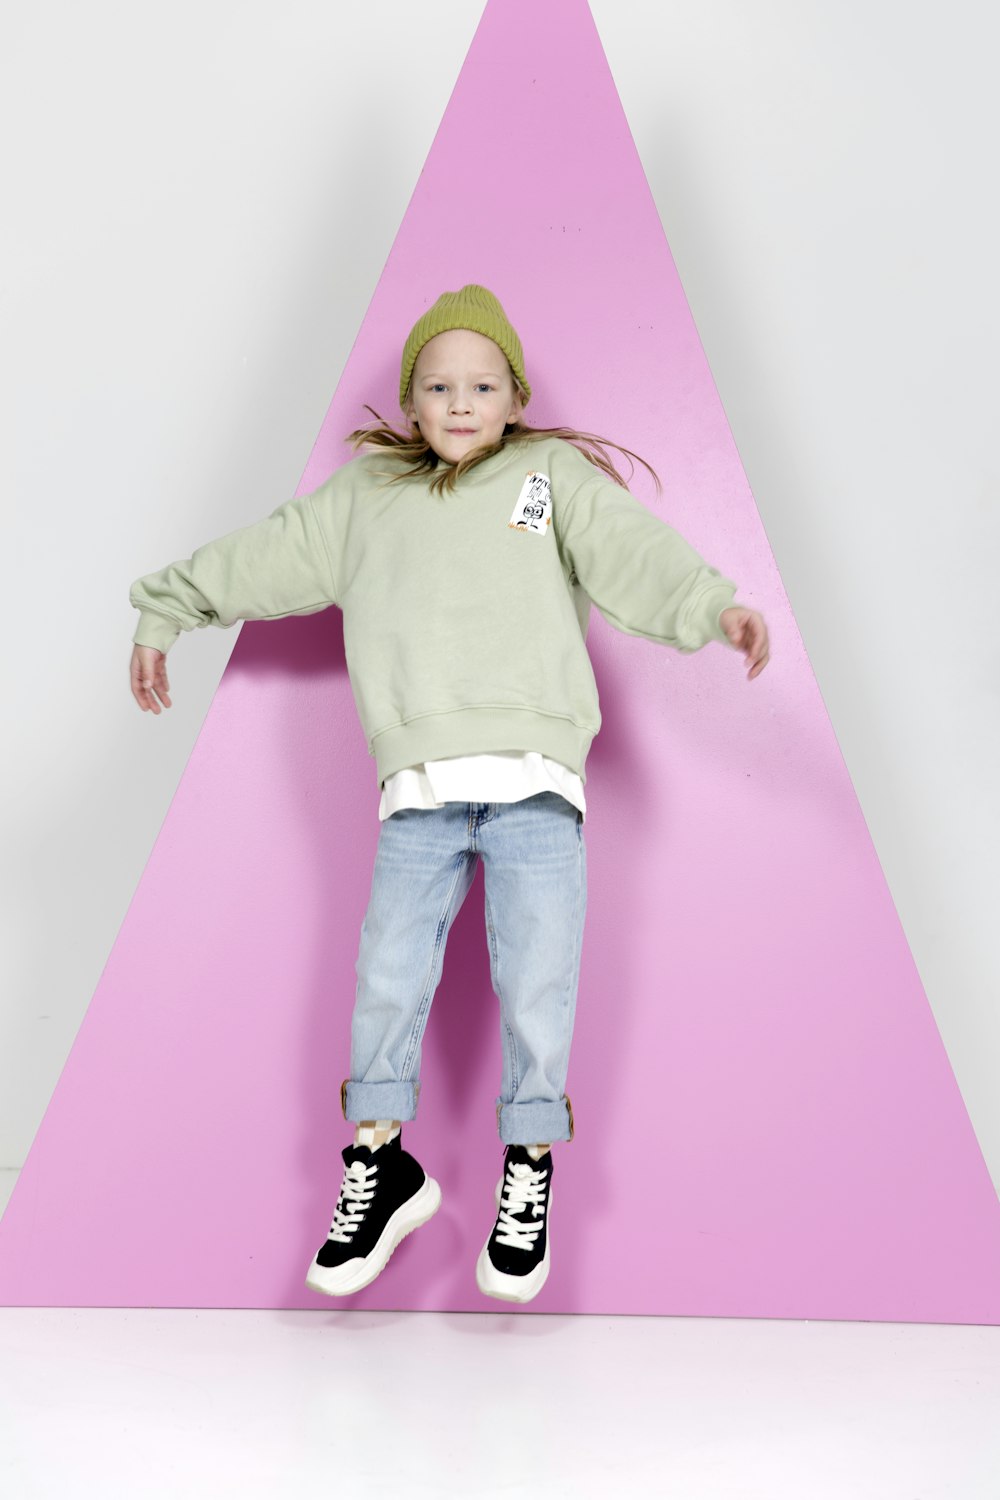 a little girl standing on top of a pink triangle